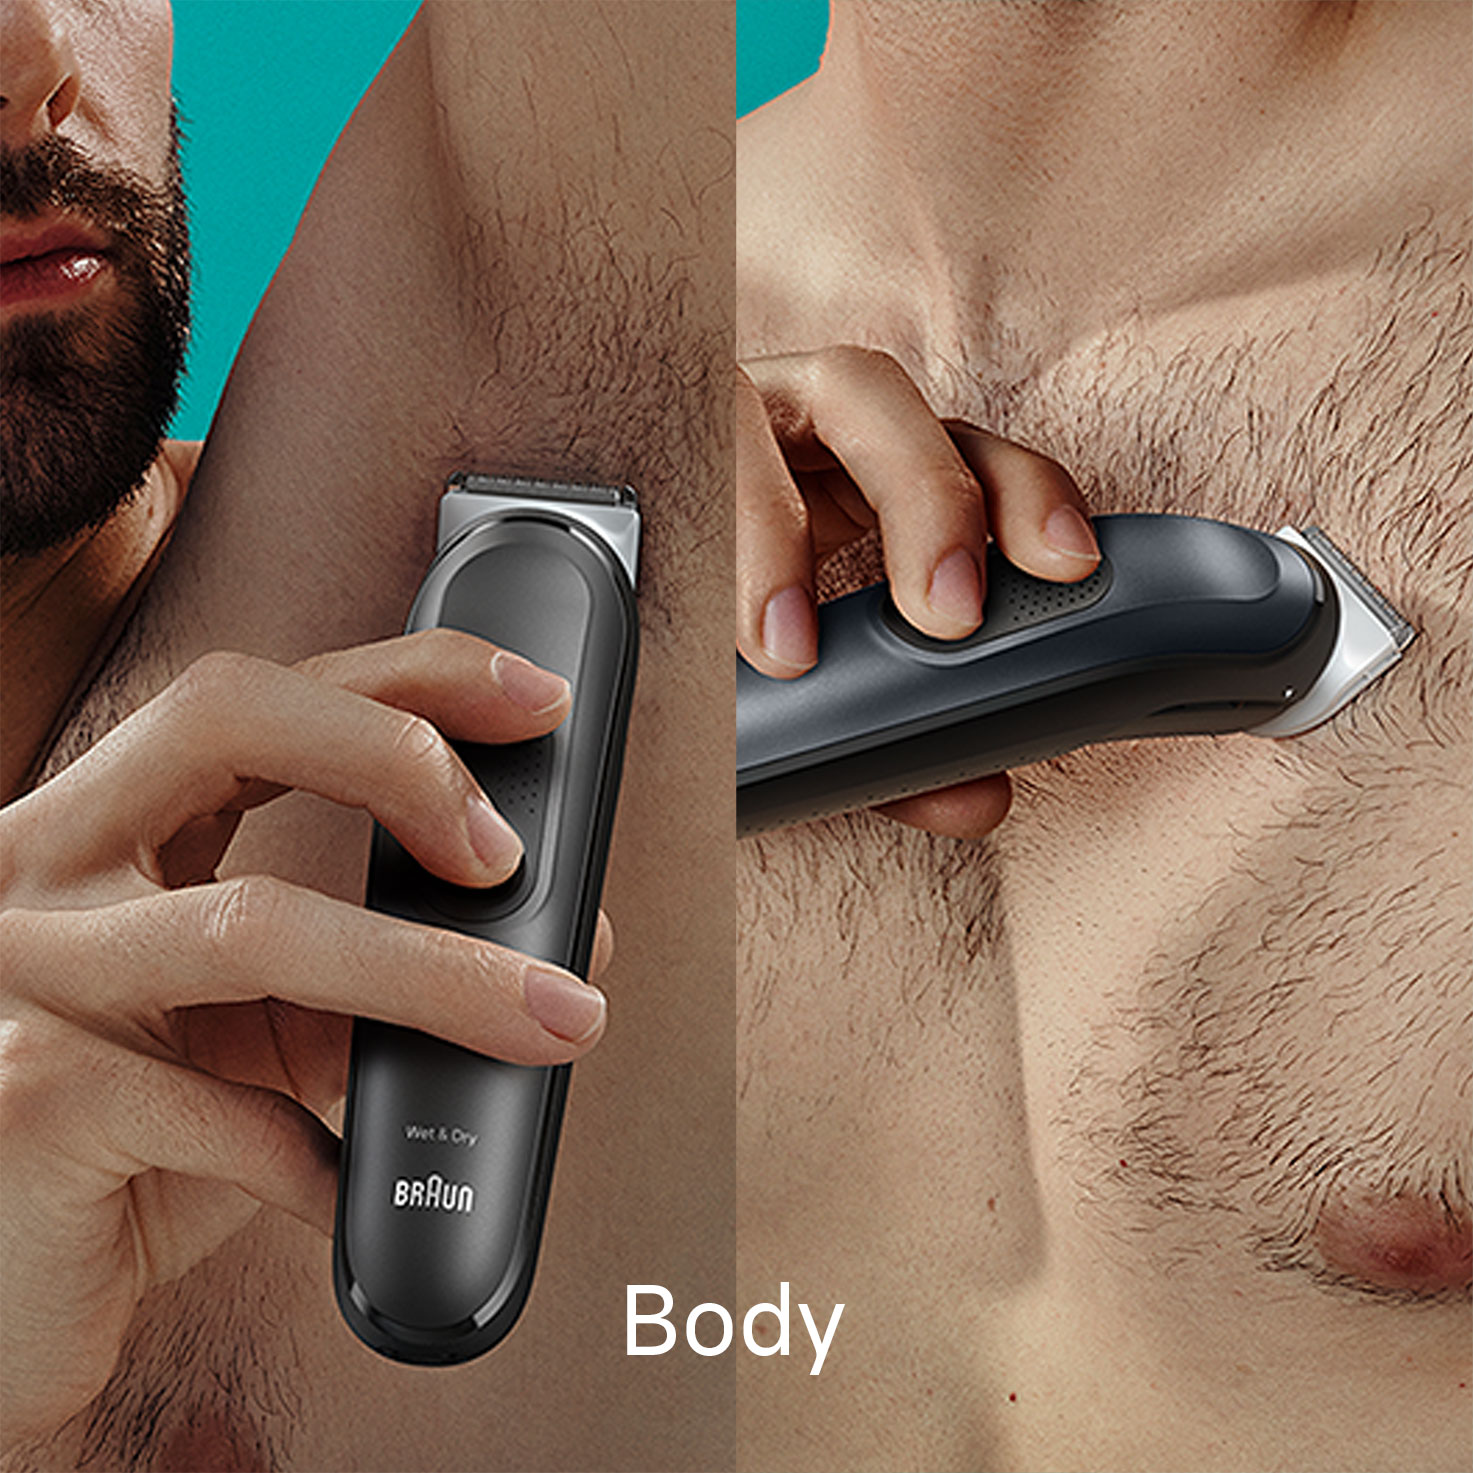 MGK 7491 : Braun's all in one male body grooming kit